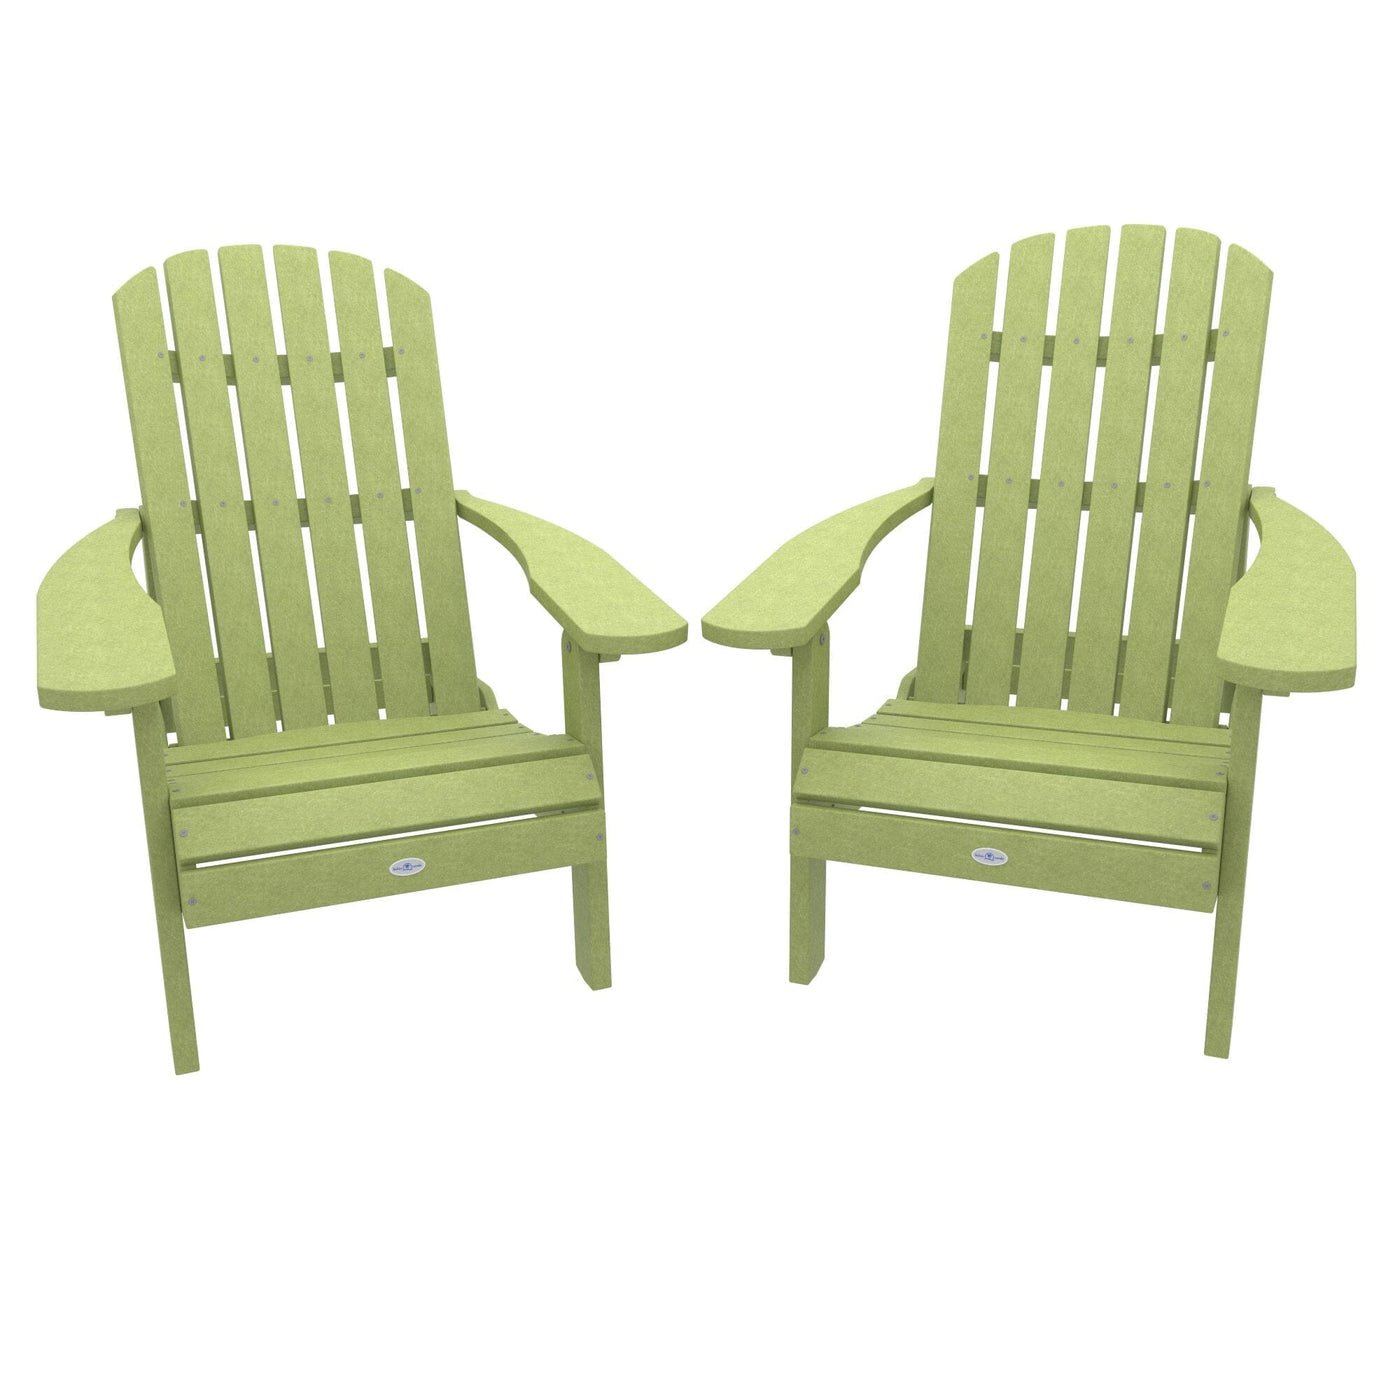 Cape Folding and Reclining Adirondack Chair (Set of 2) Kitted Set Bahia Verde Outdoors Palm Green 